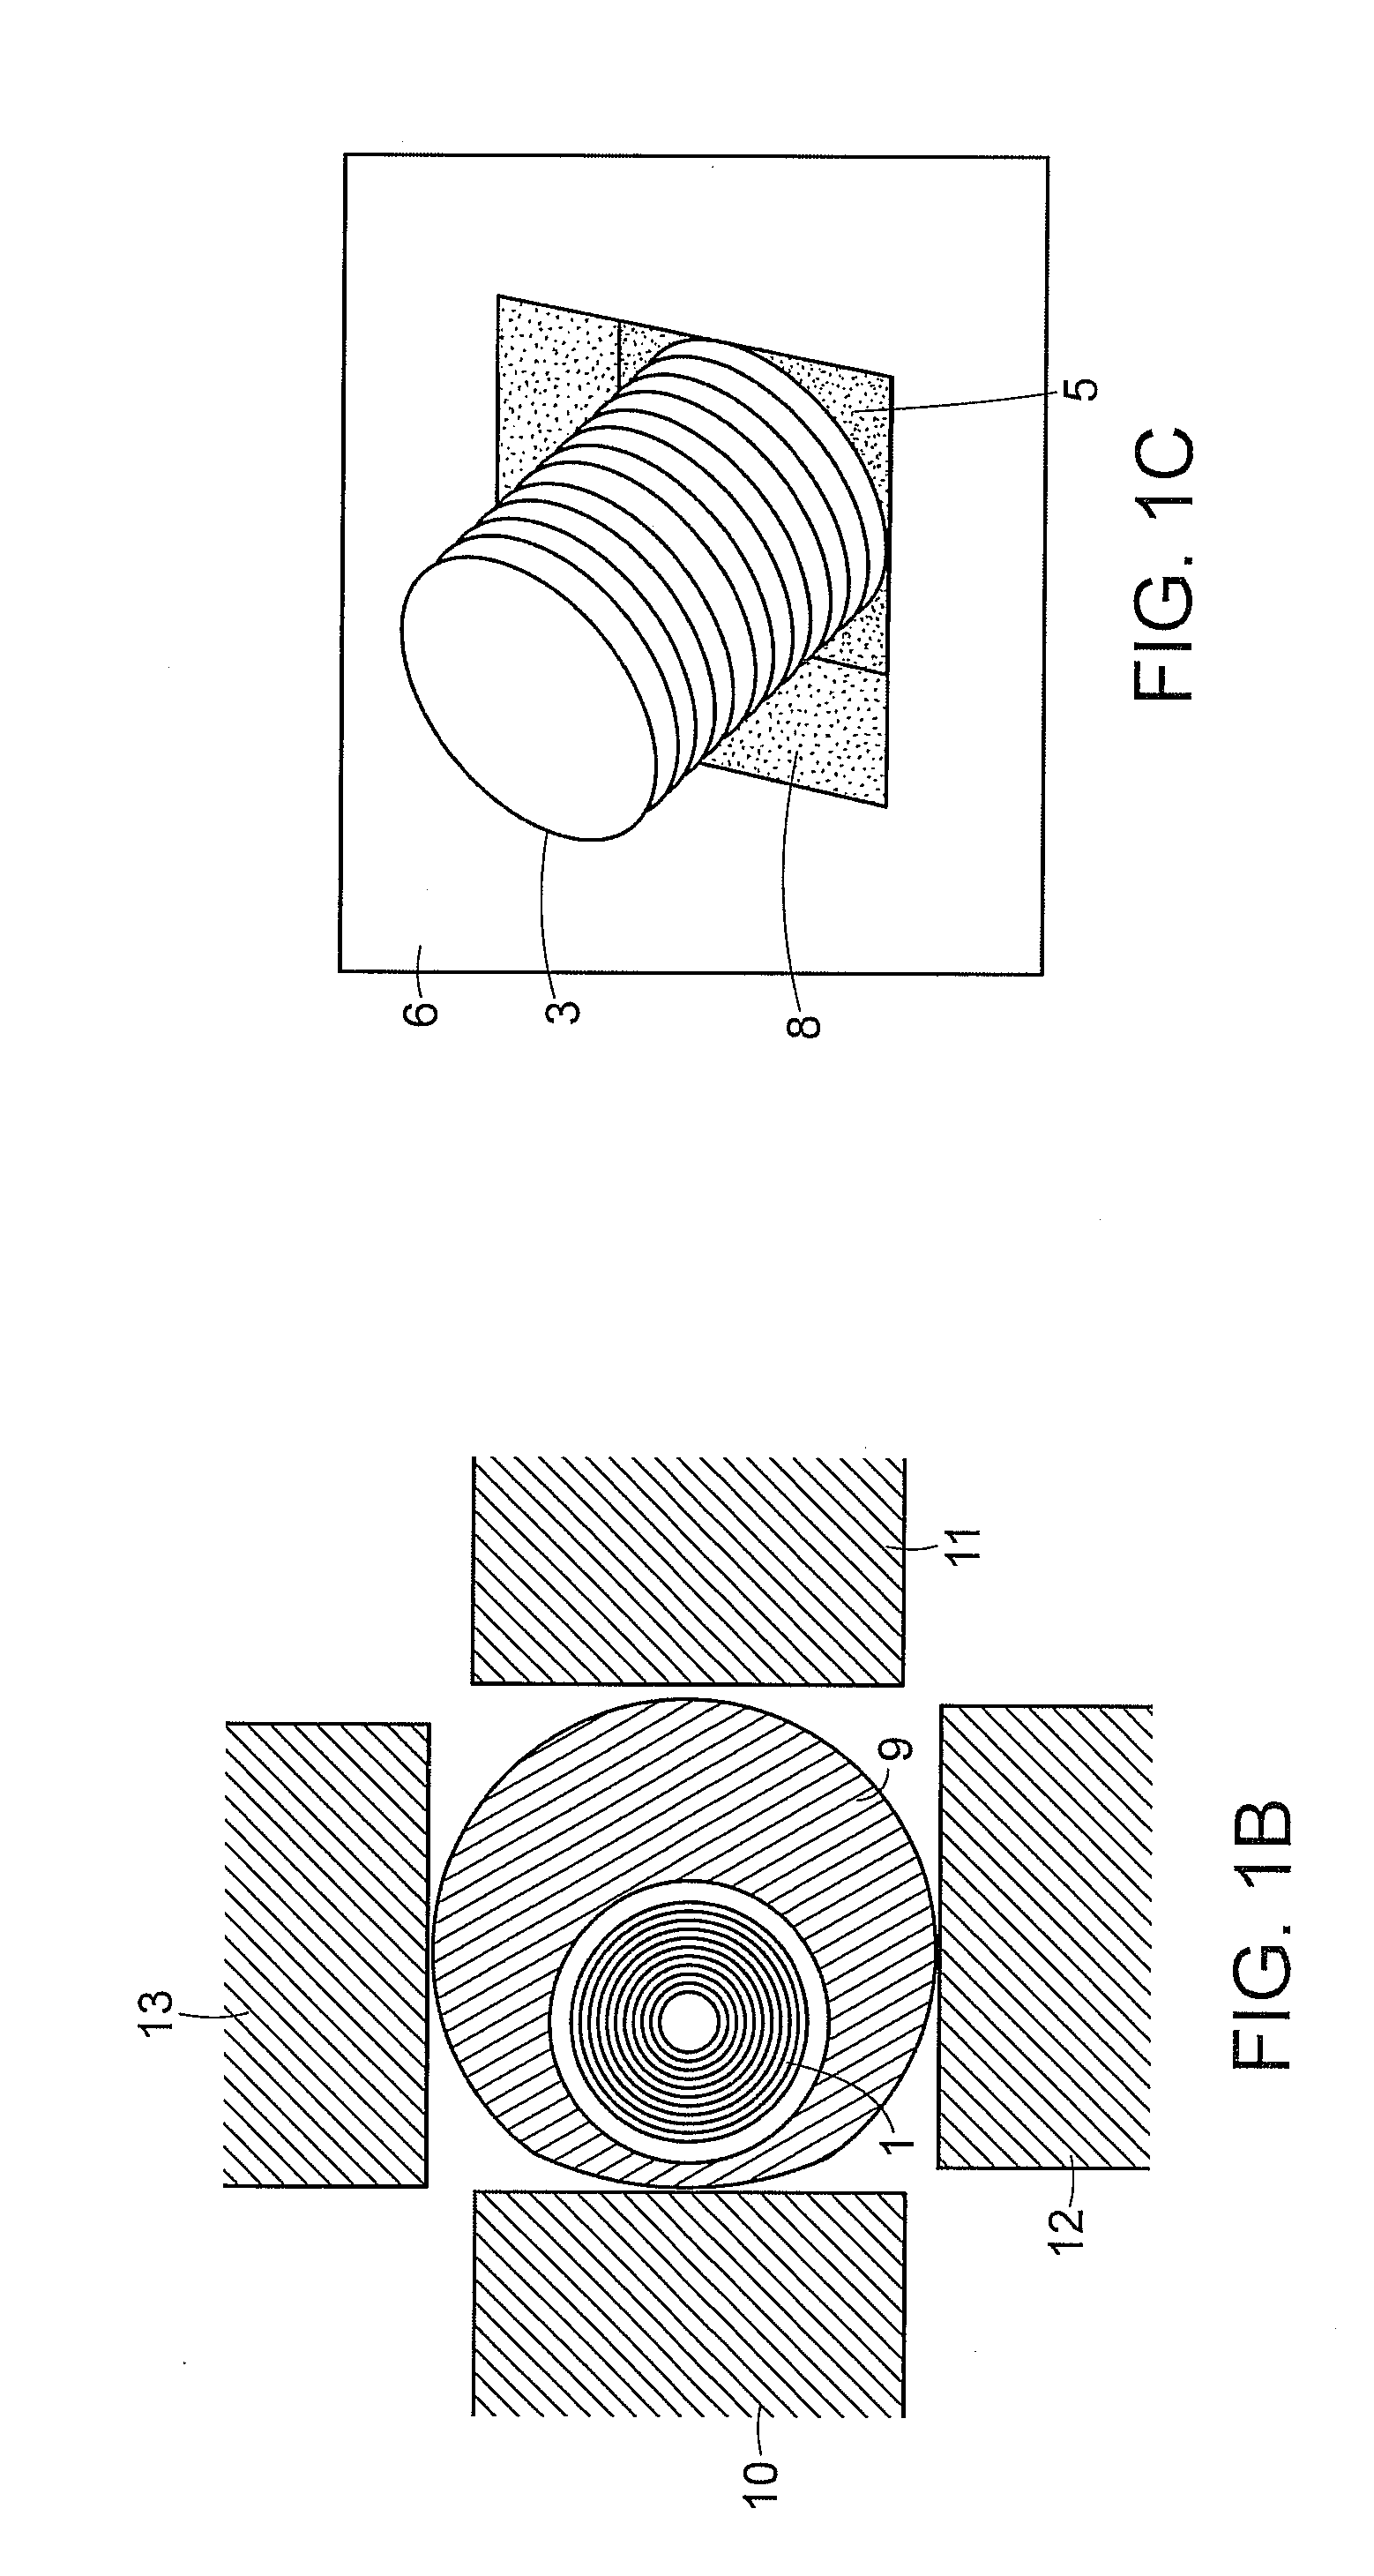 Devices for storing energy in the mechanical deformation of nanotube molecules and recovering the energy from mechanically deformed nanotube molecules